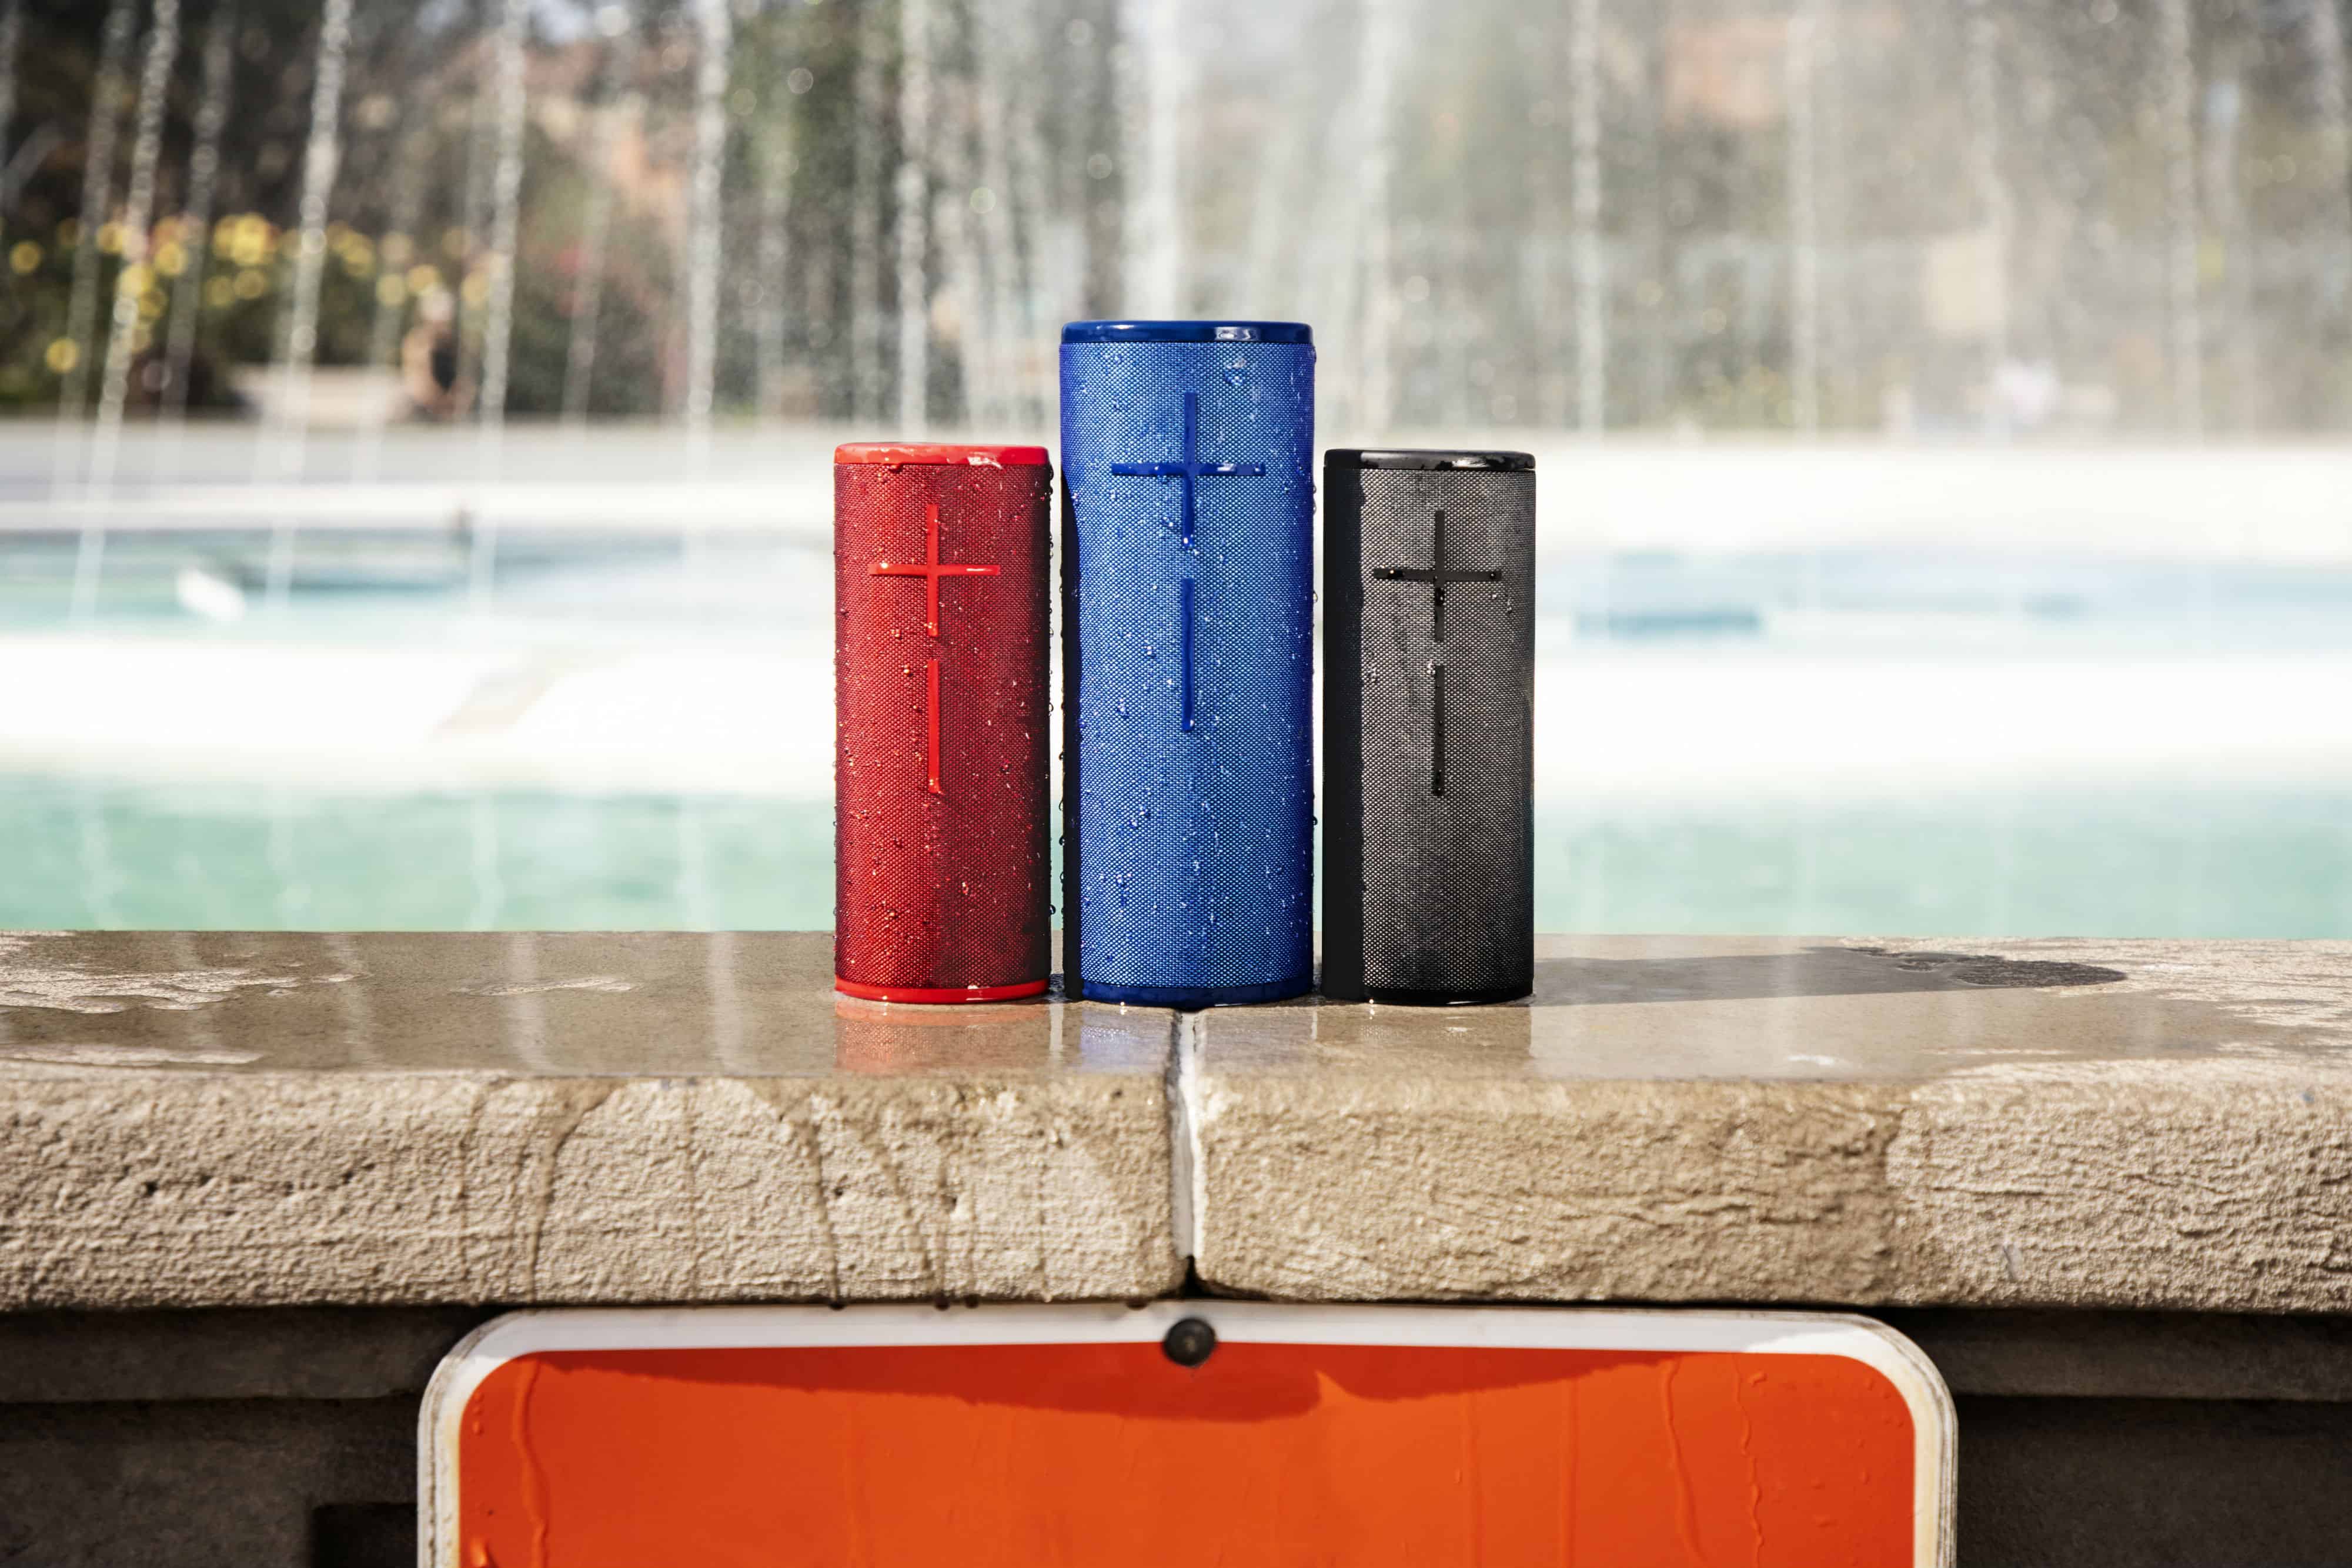 The UE Boom 3 and Megaboom 3 color names -- Sunset, Lagoon and Night -- could be more straightforward but whatever.